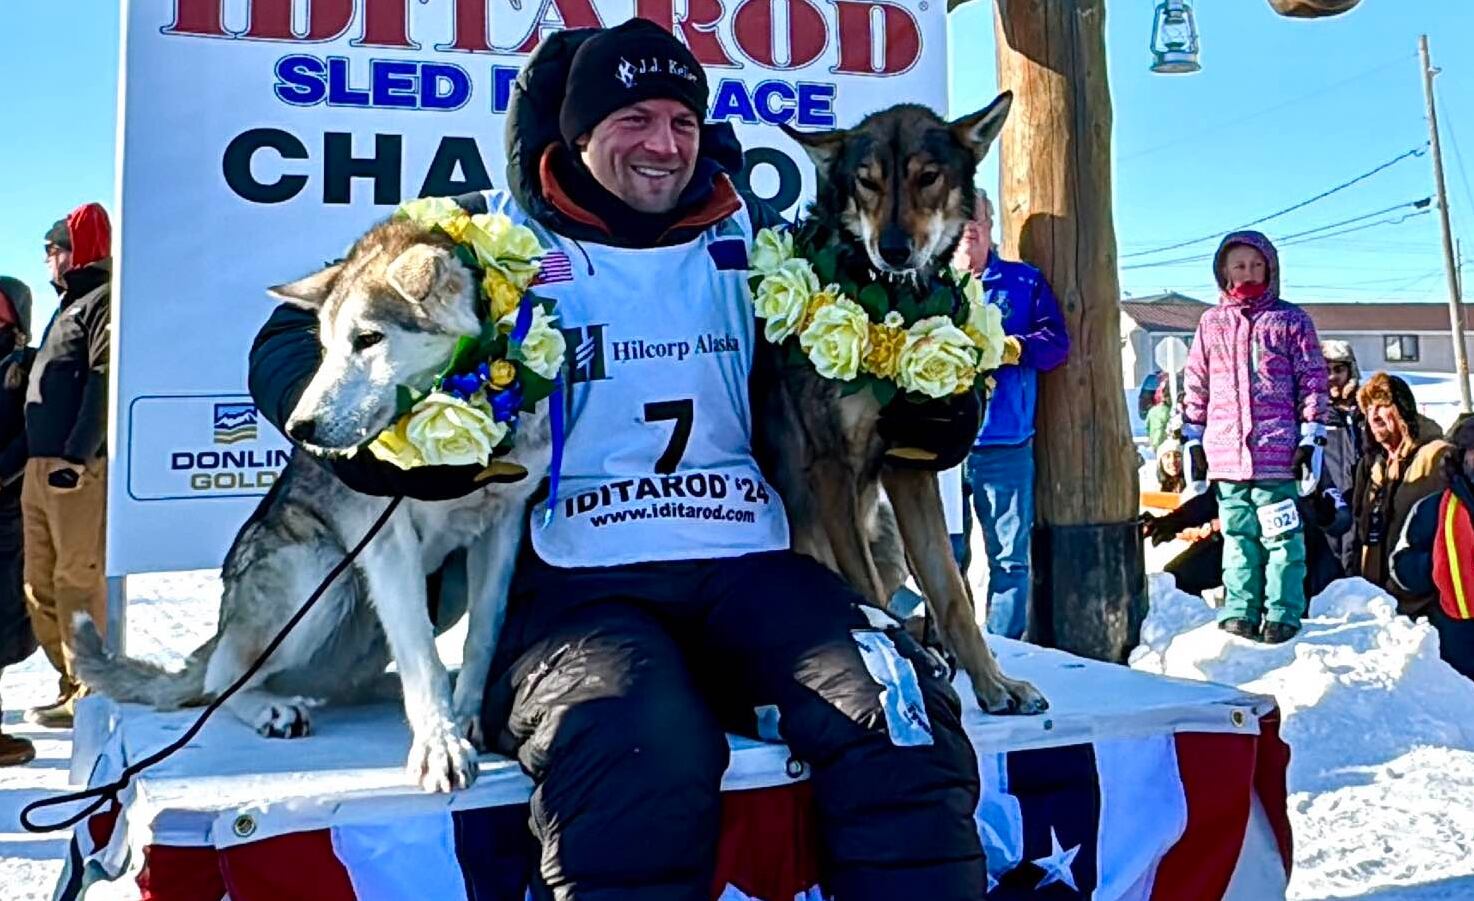 Dallas Seavey poses with two of his team members at the Iditarod finish line after winning his...